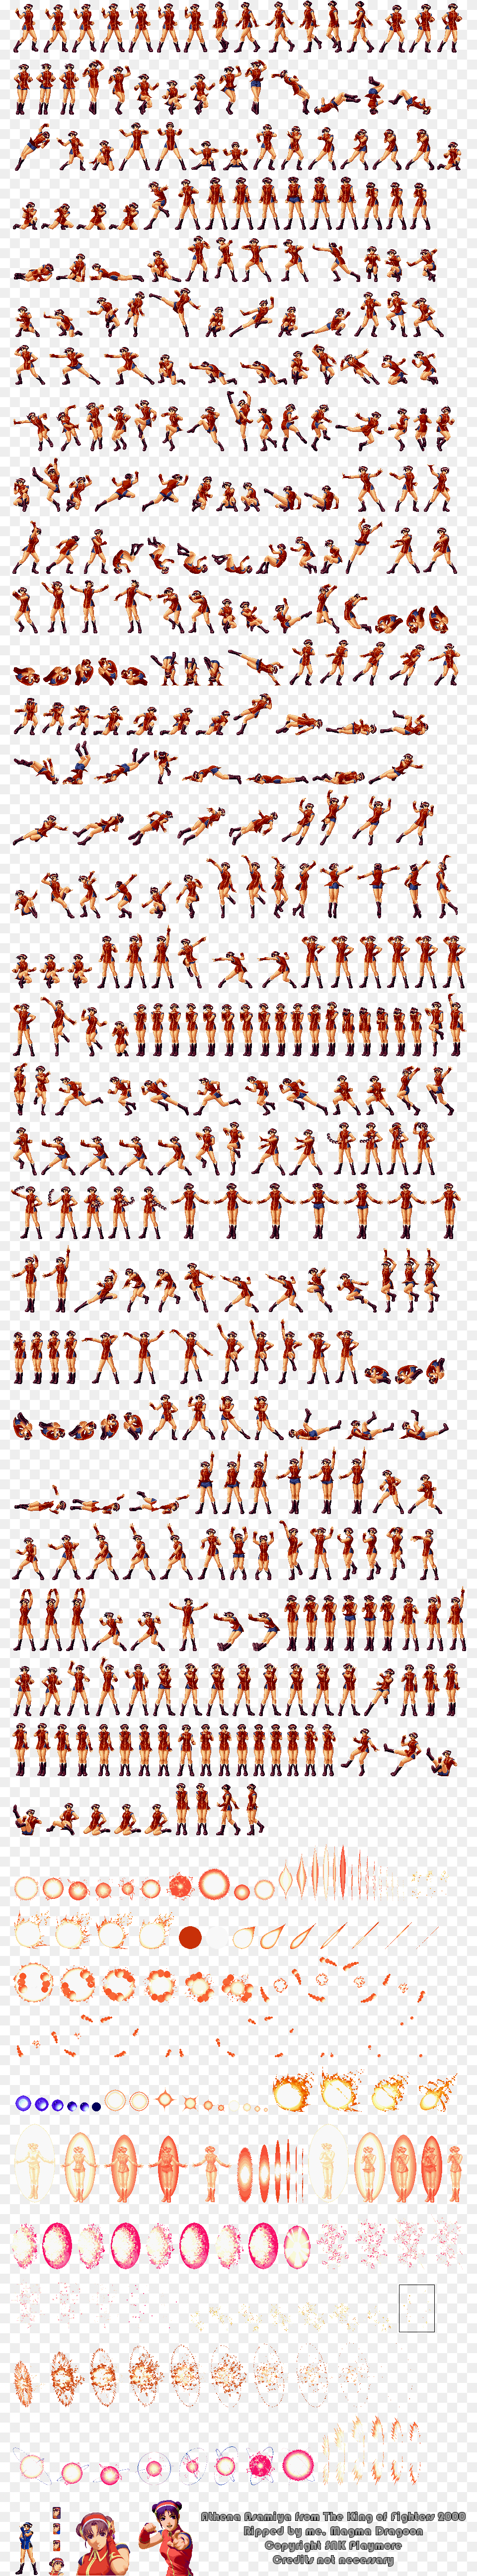 King Of Fighters Athena Sprites, People, Person, Advertisement, Crowd Png